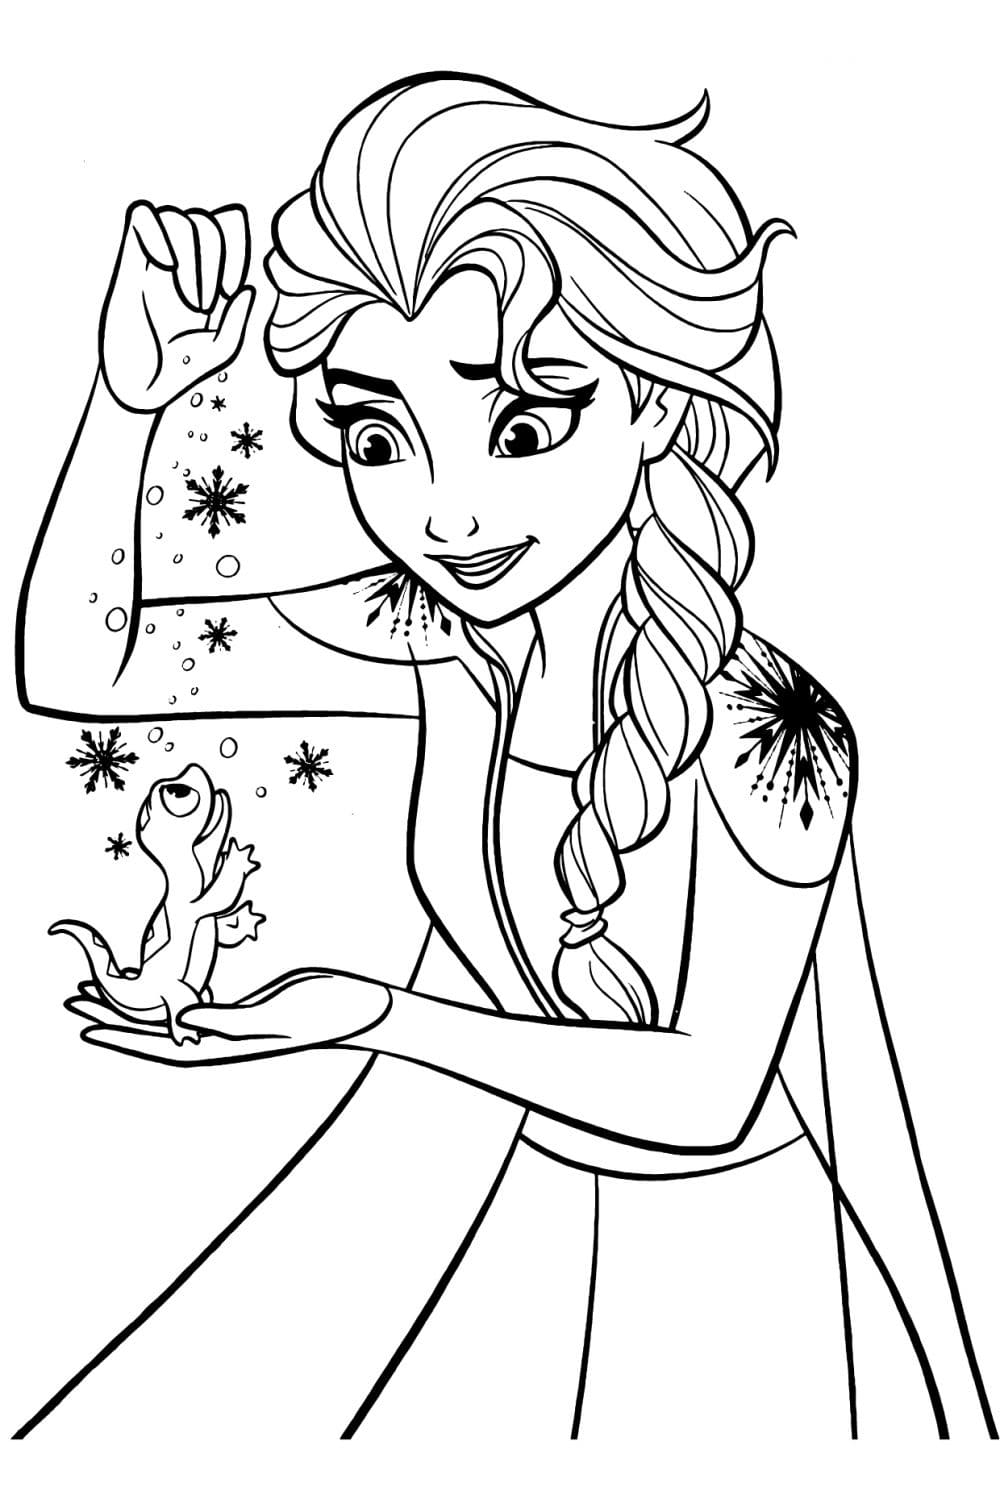 Free Printable Elsa Coloring Pages for Kids - Best Coloring Pages